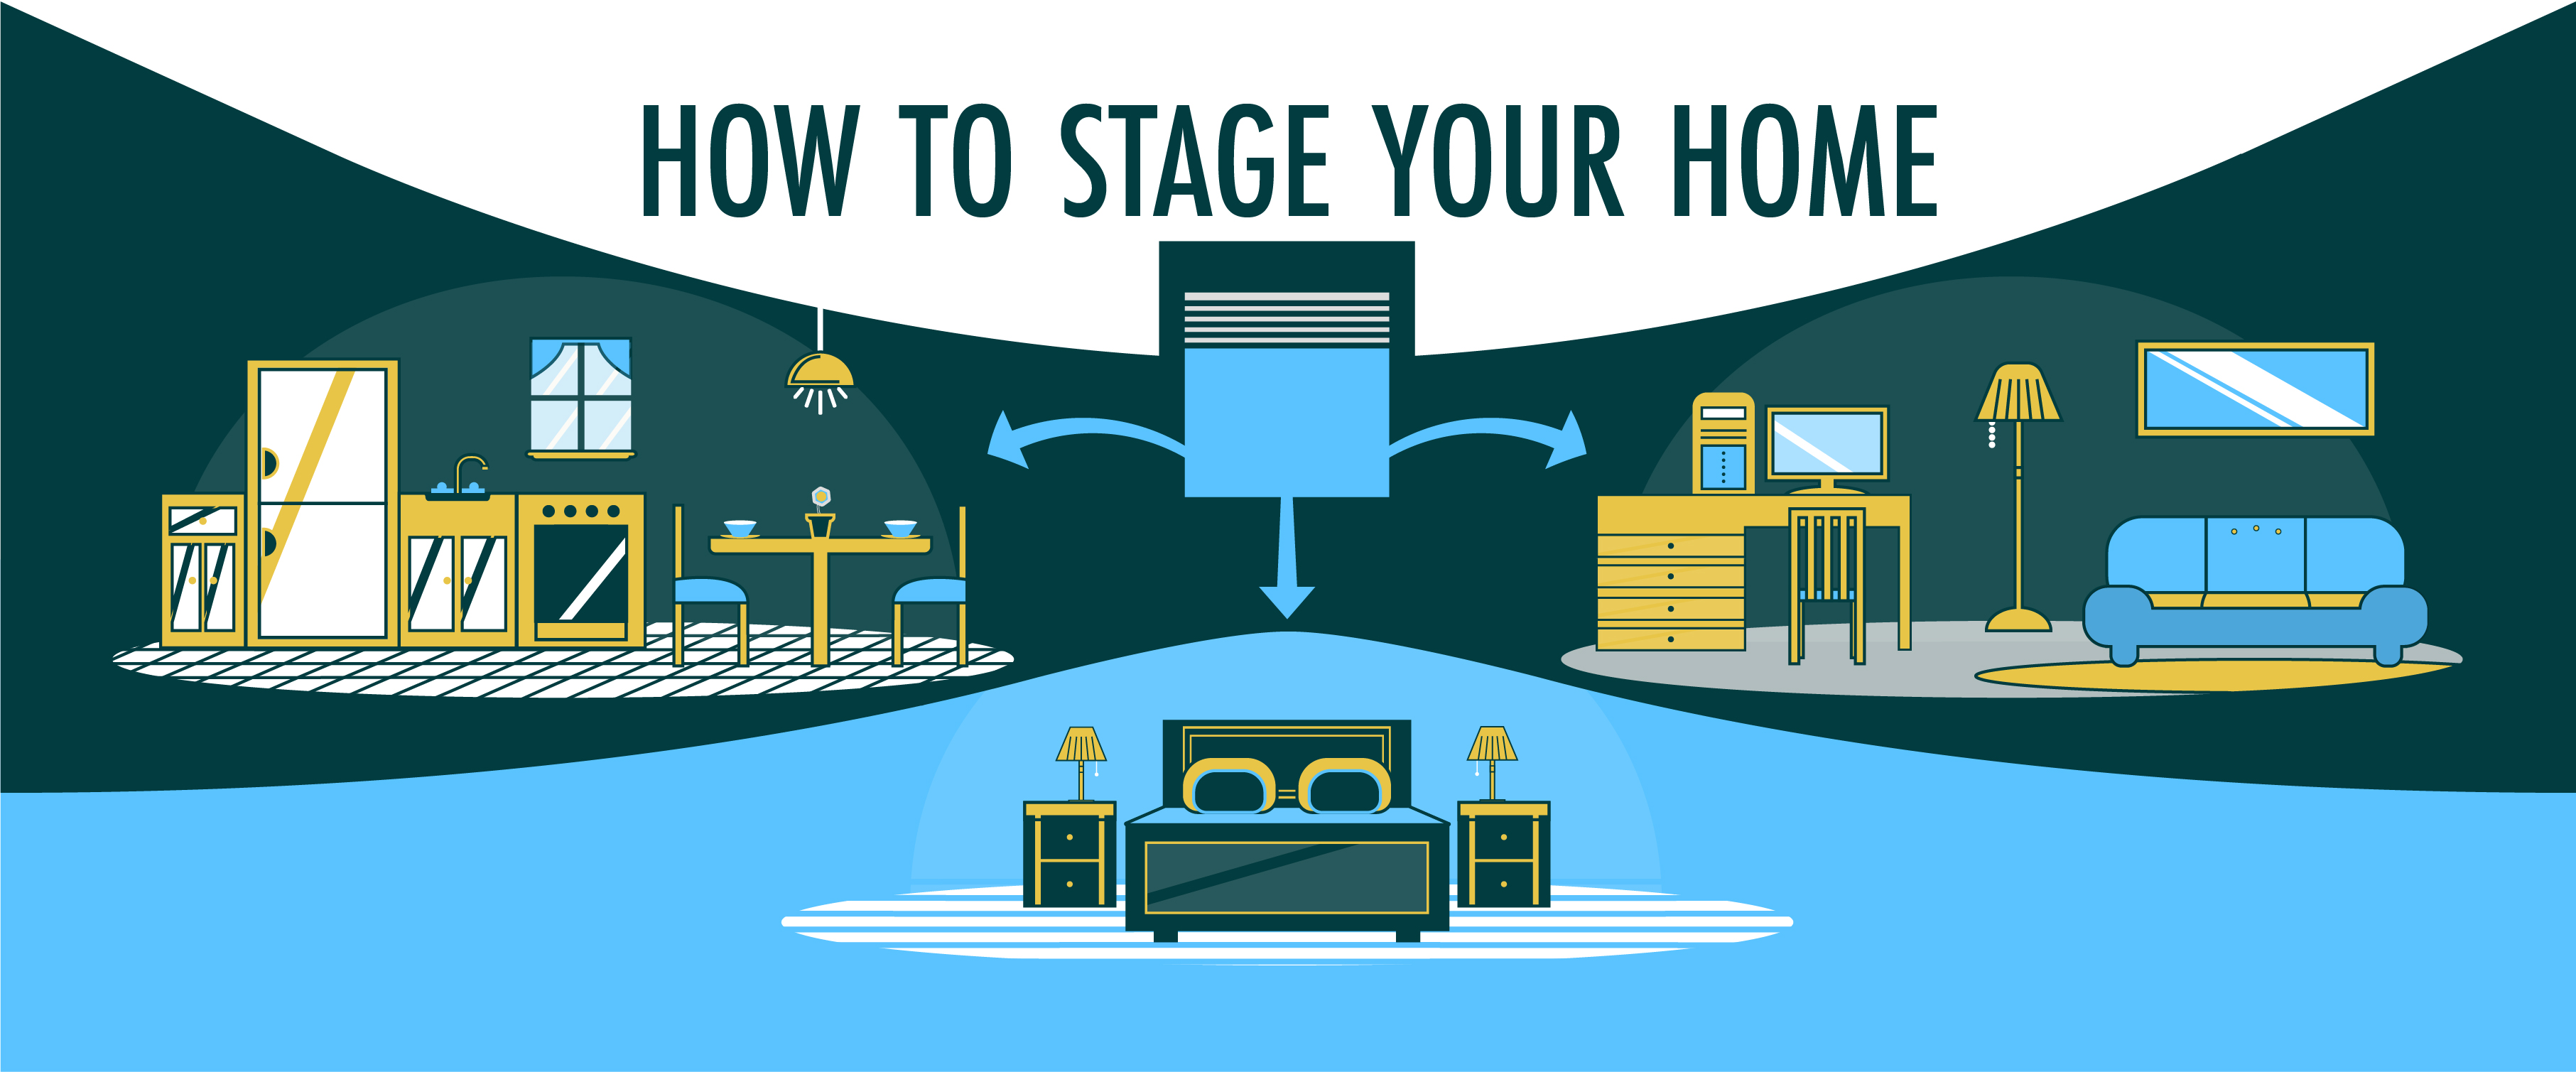 Storage rental to help stage your home